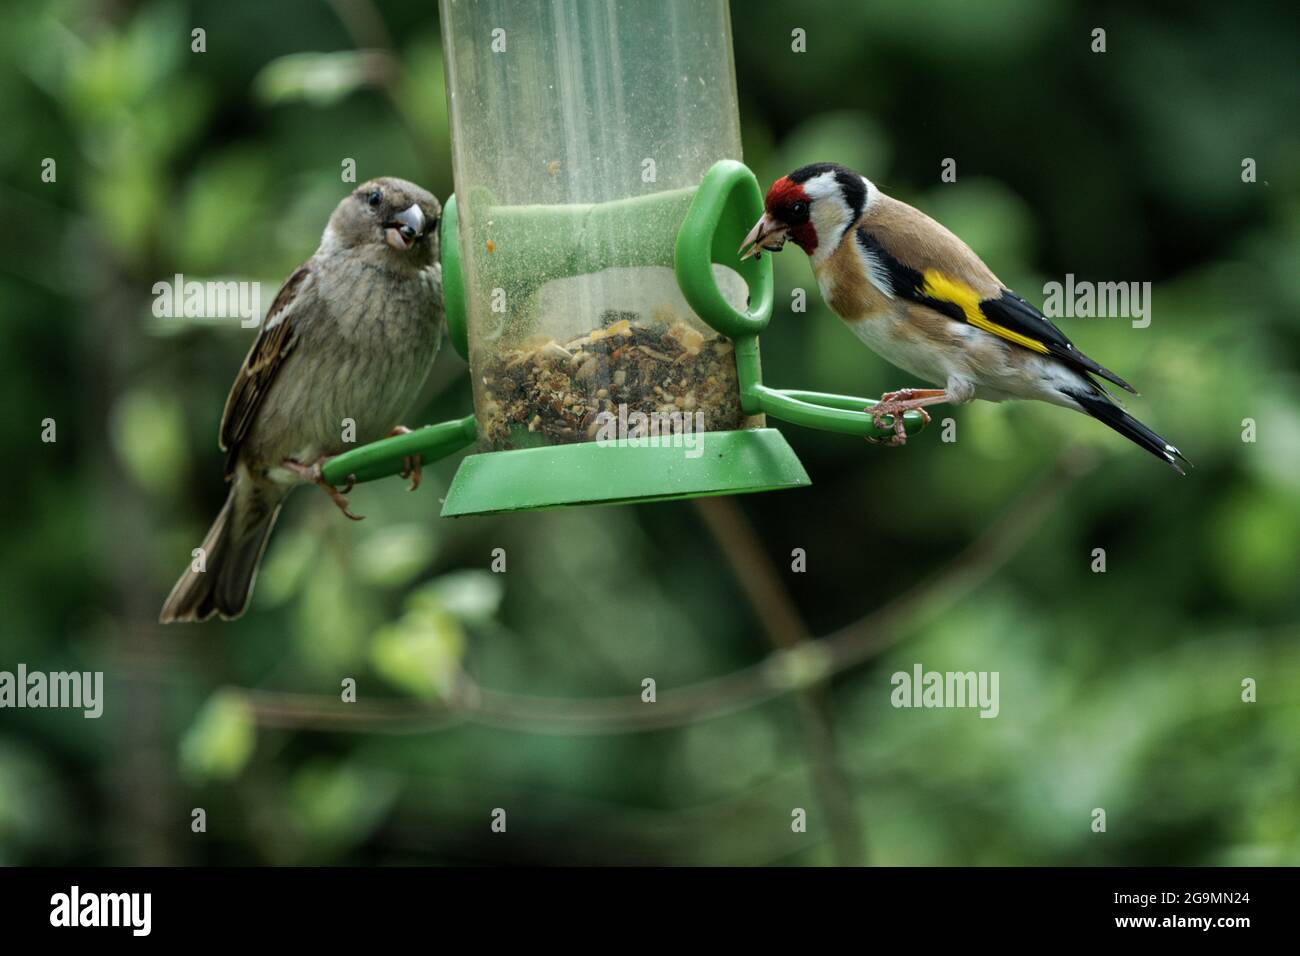 Goldfinch and sparrow sharing a bird feeder in a Wiltshire garden Stock Photo